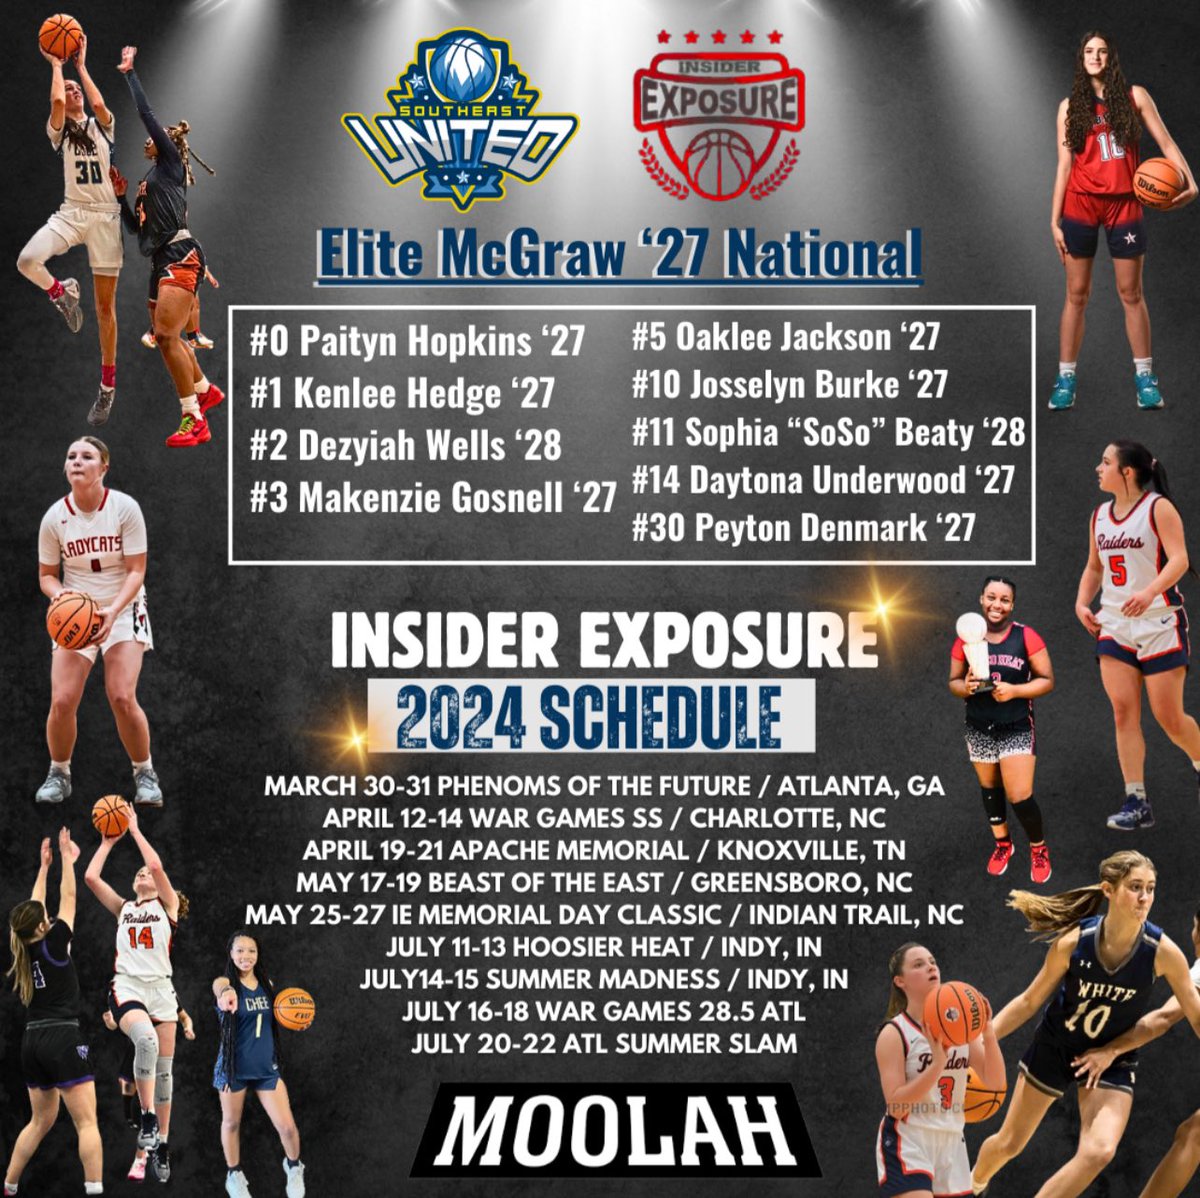 Very excited to announce our @SEUnited_Elite ‘27 National Team Great group of talent! We have a little bit of everything college coaches! @PaitynHopkins @KenleeHedge21 @DezyiahW @MakenzieGosnell @oaklee05 @JosselynBurke10 @Sosohoops @D14Underwood27 @DenmarkPeyton @InsiderExposure